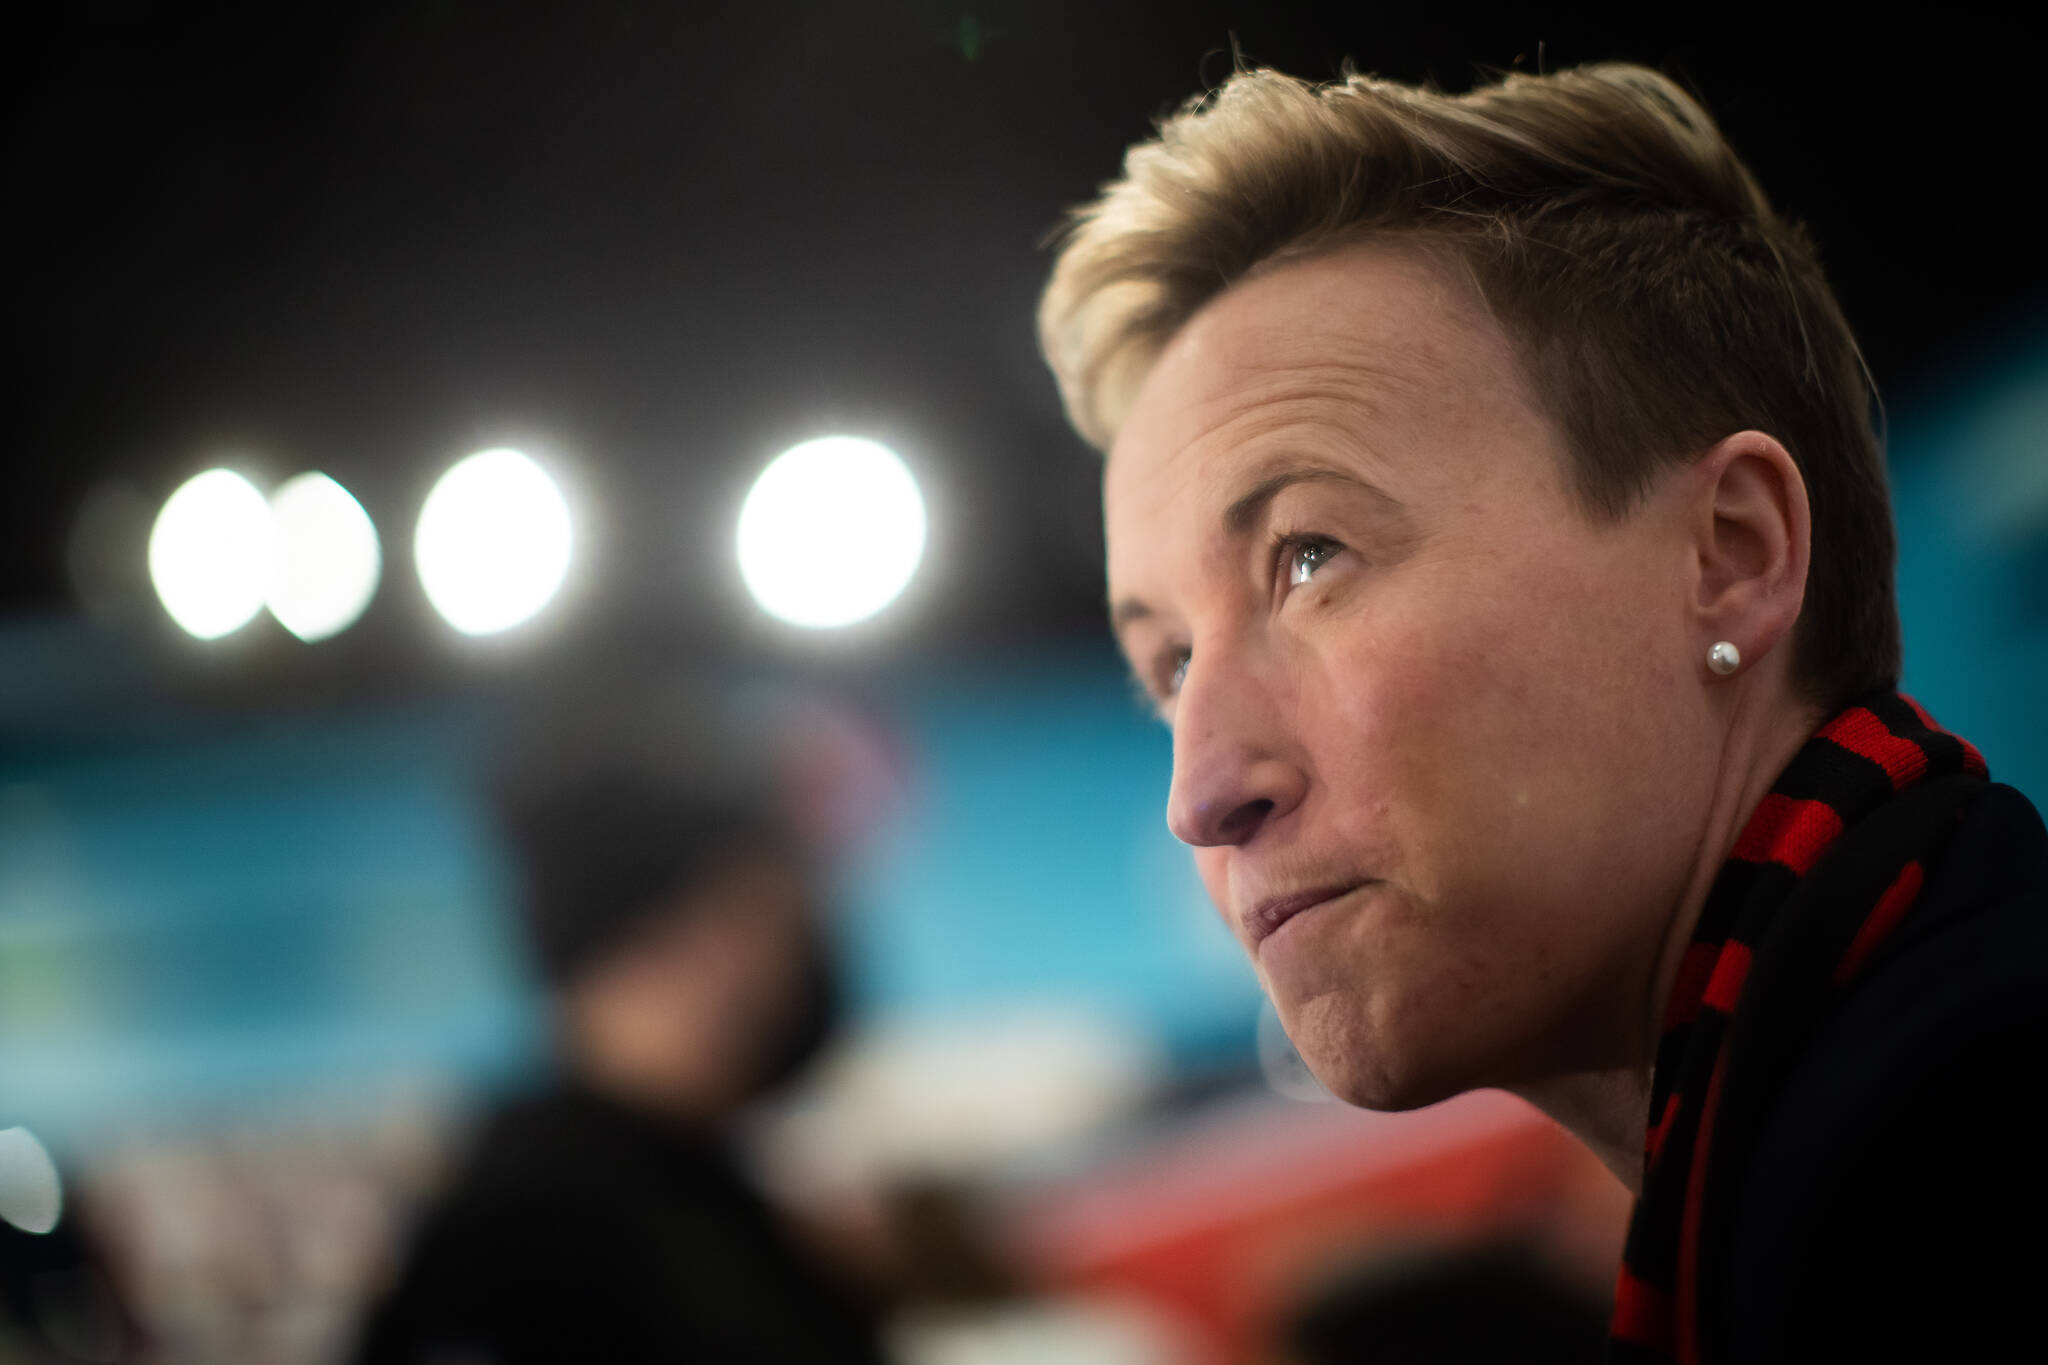 Canada women’s national soccer team head coach Bev Priestman pauses while responding to questions after an announcement, in Vancouver, on Wednesday, March 16, 2022. THE CANADIAN PRESS/Darryl Dyck